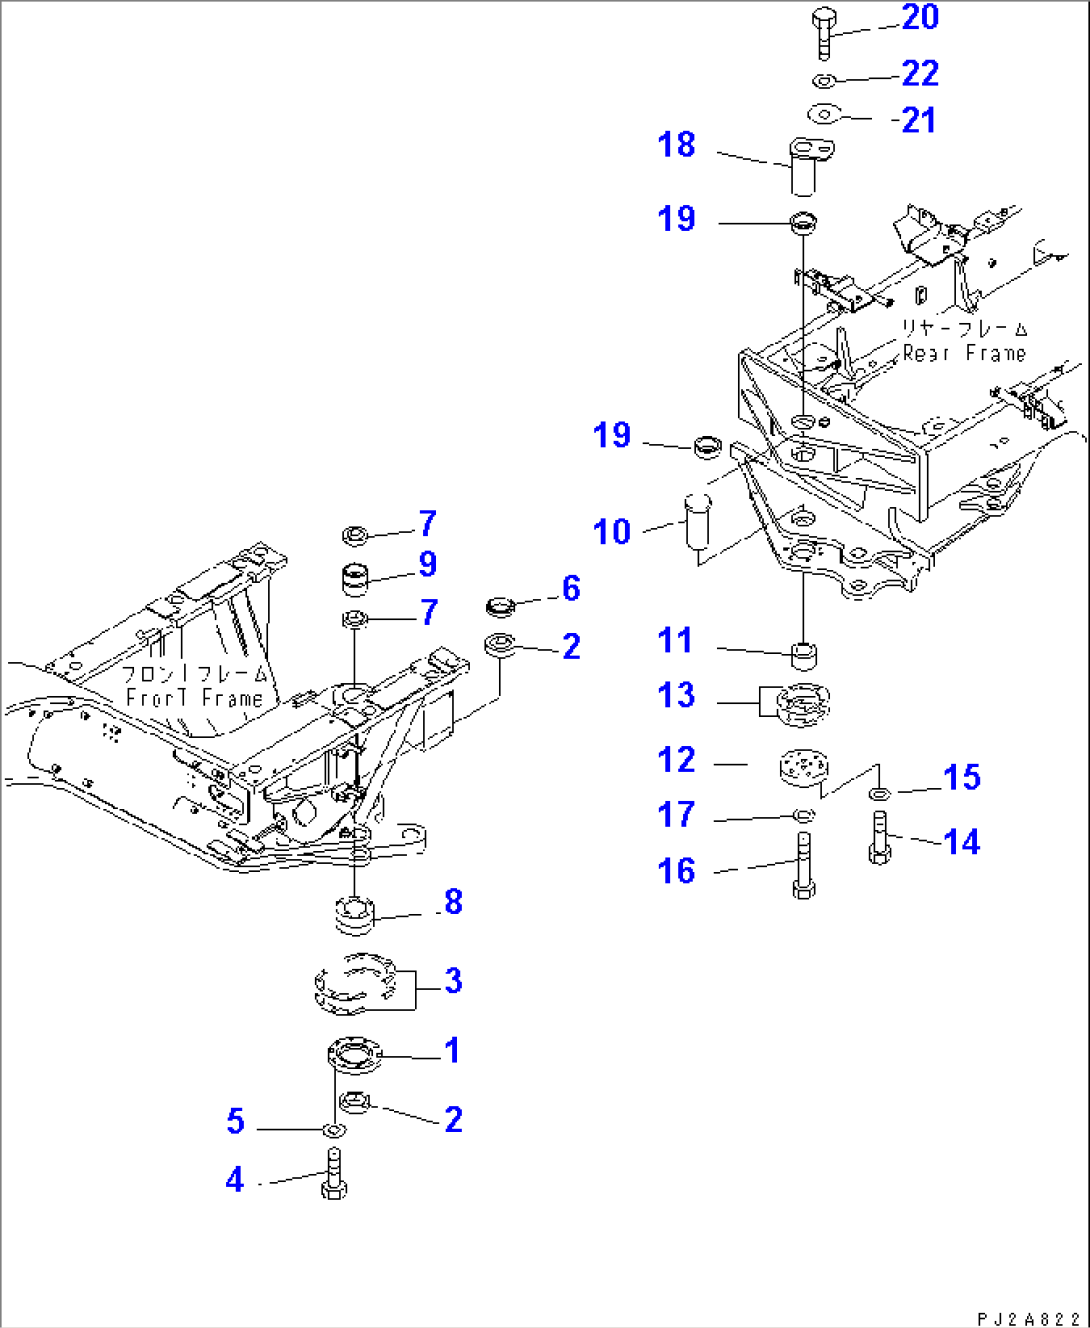 HINGE PIN (FOR FRONT AND REAR FRAME)